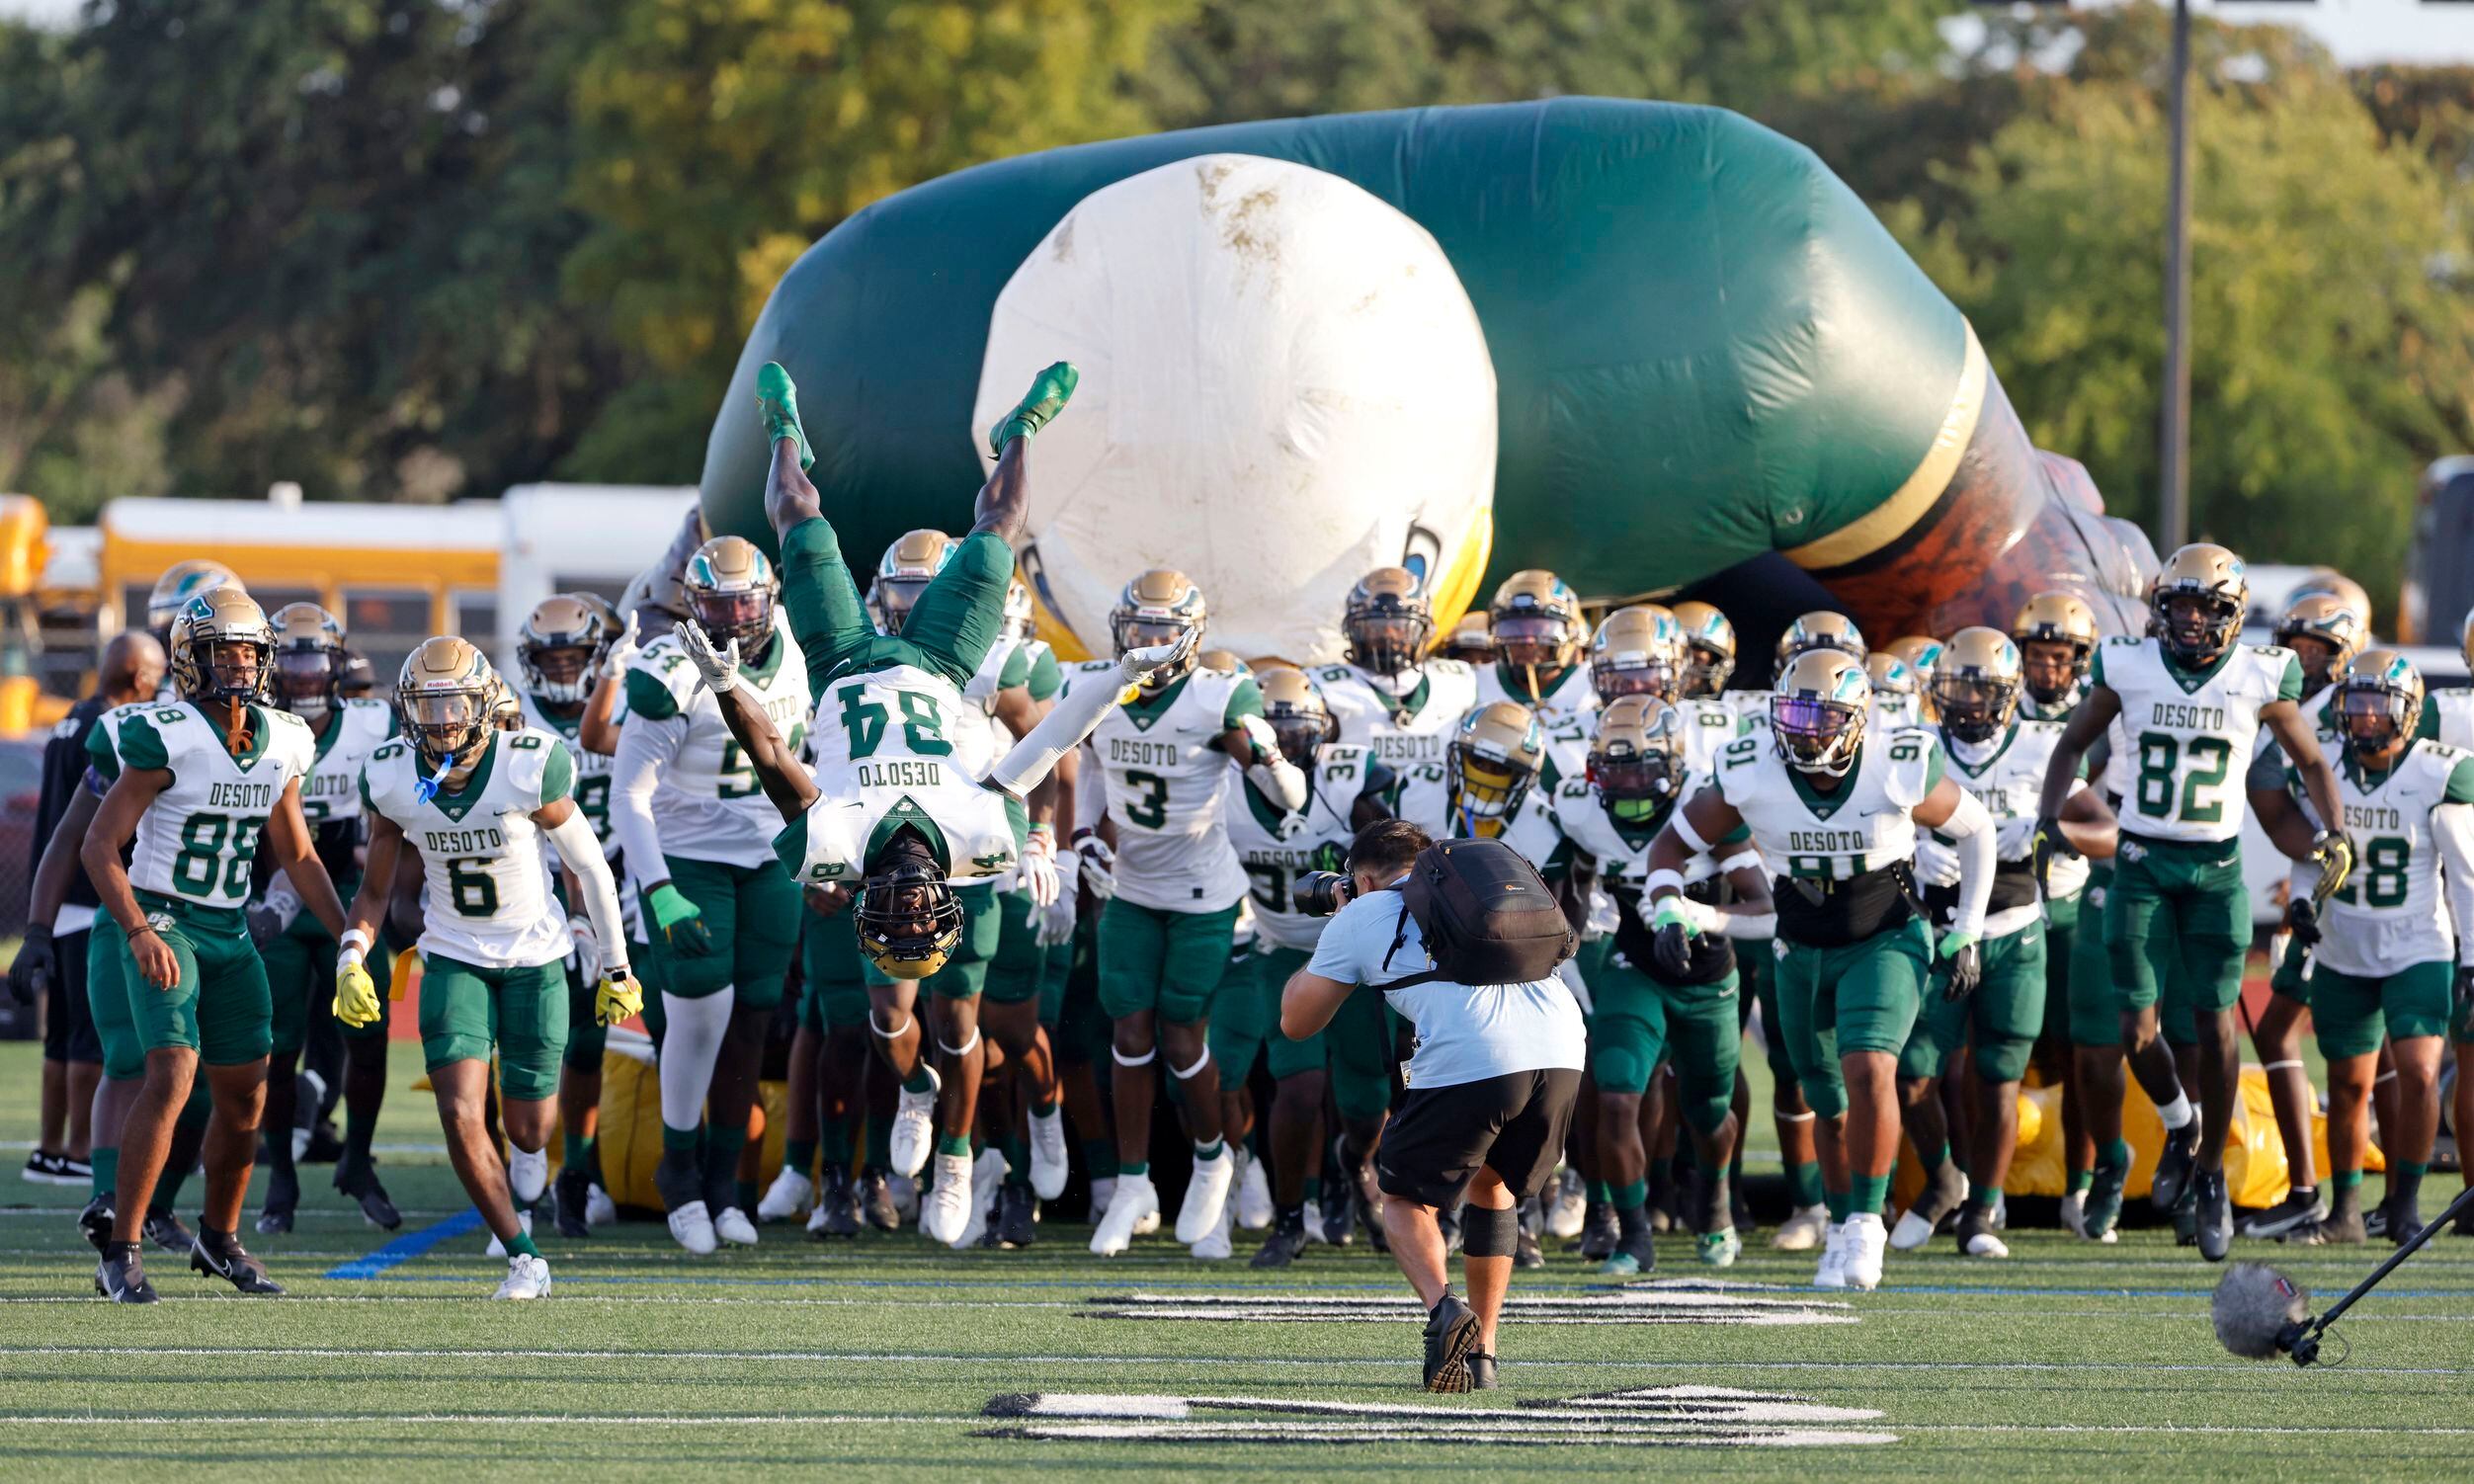 DeSoto senior wide receiver Maquis Wortham (84) flips in front of his team as they take the...